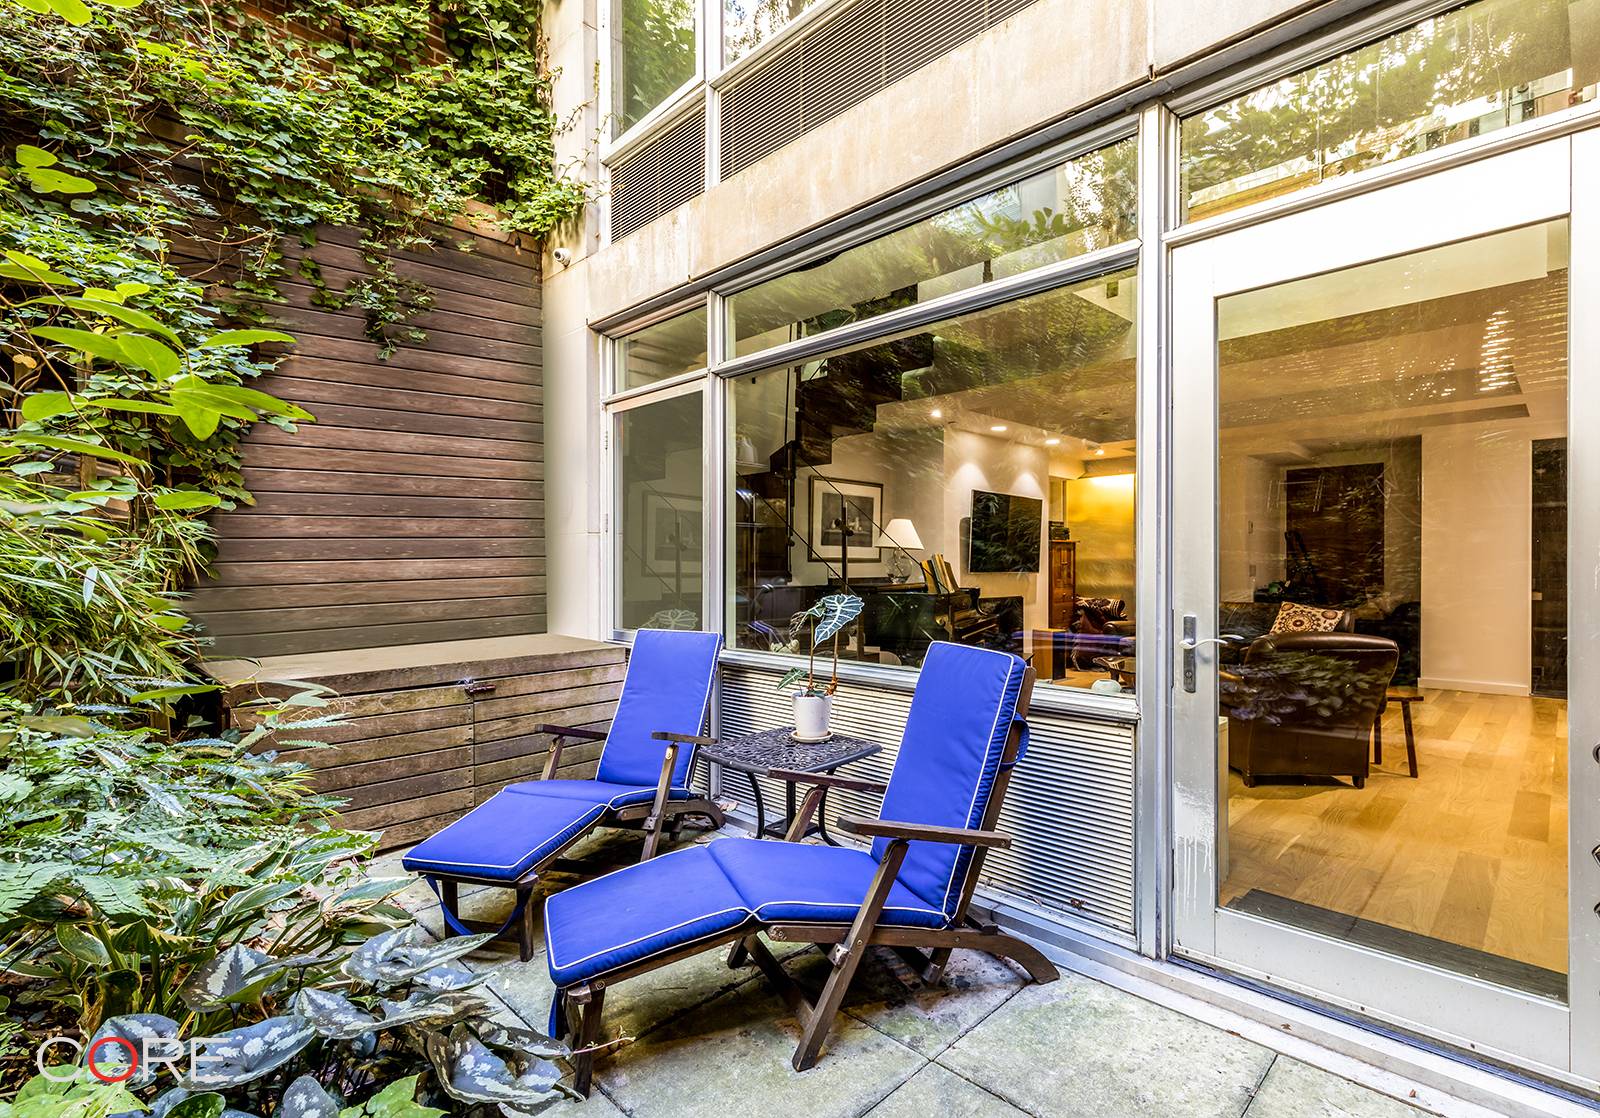 This private garden oasis offers over 3, 000 square feet of interior and outdoor space in this distinct triplex, located in a boutique four unit townhome.